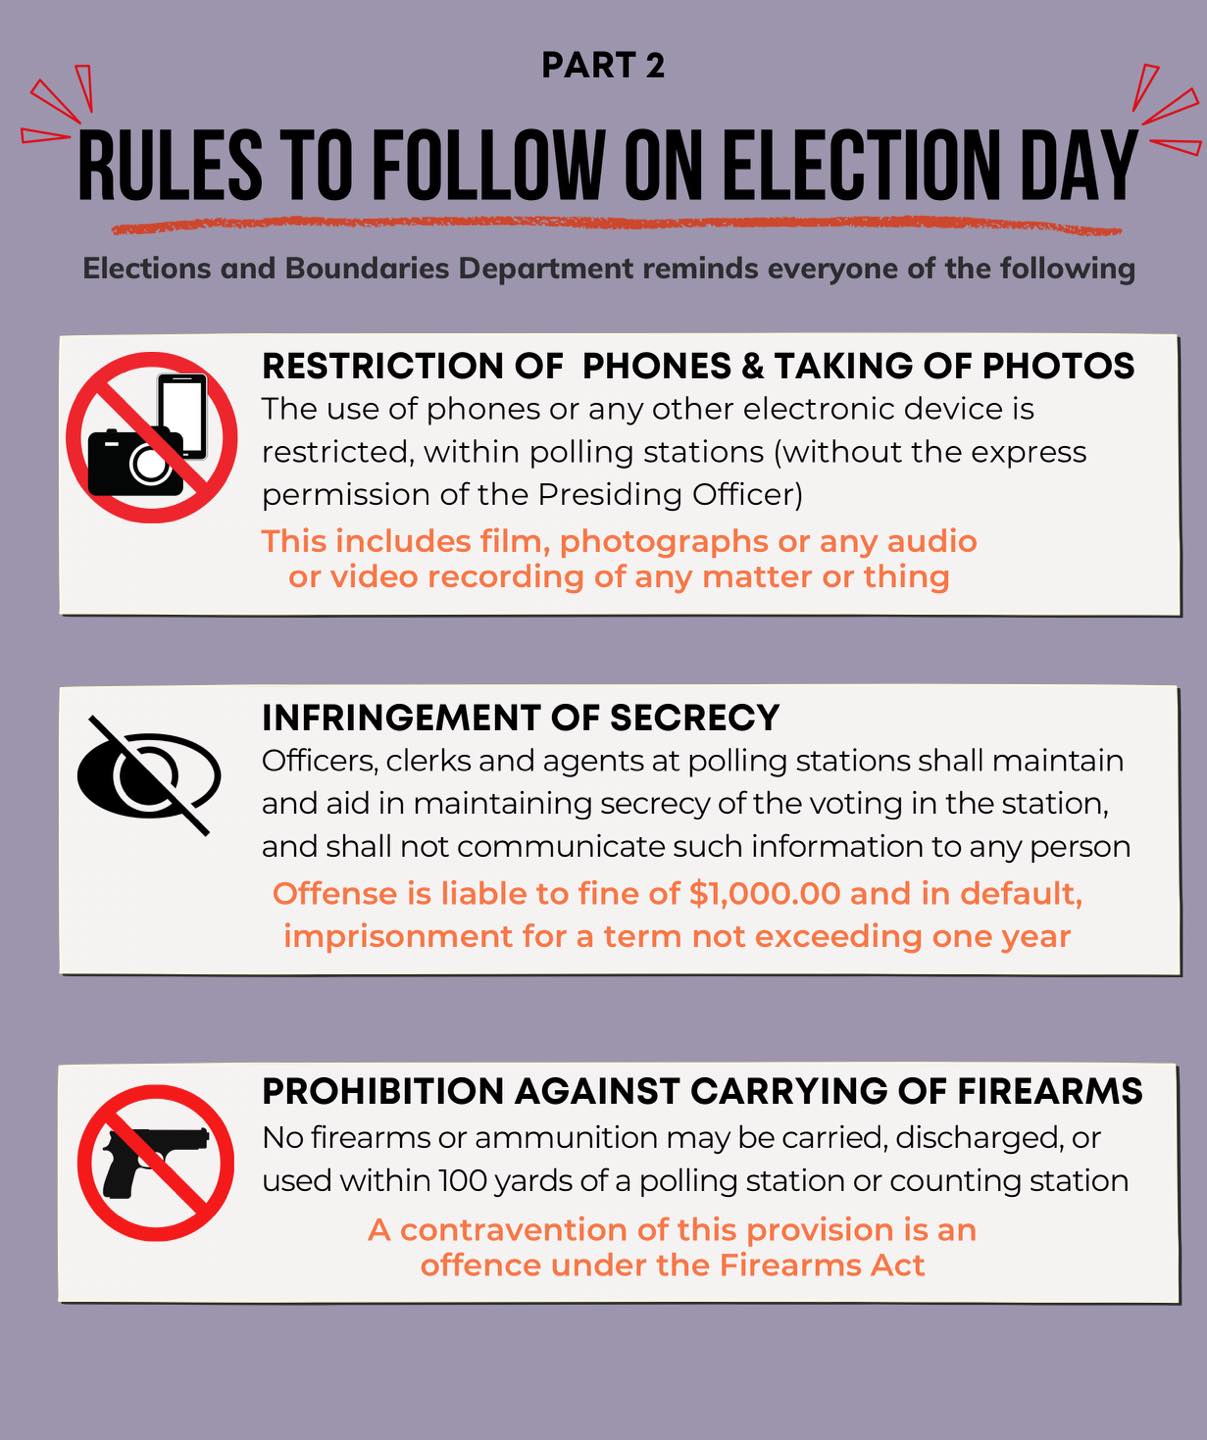 Rules for voting - no firearms, no cameras or phones